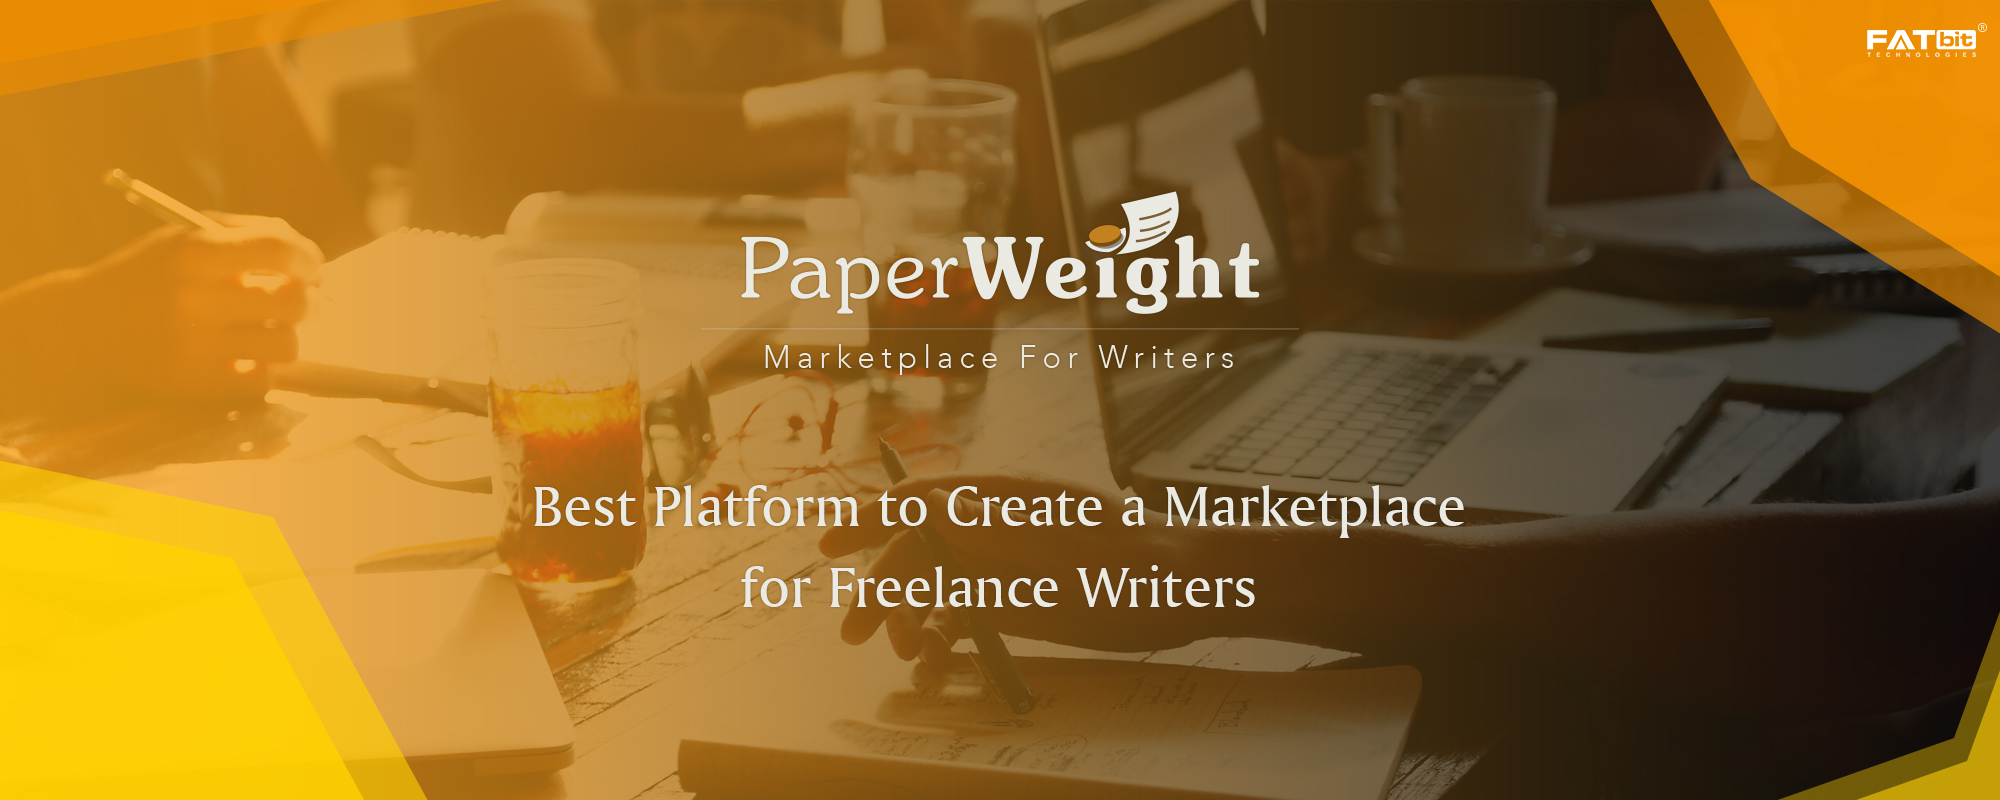 How Paperweight Helps Build Writer’s Marketplace For Freelance Writing Service